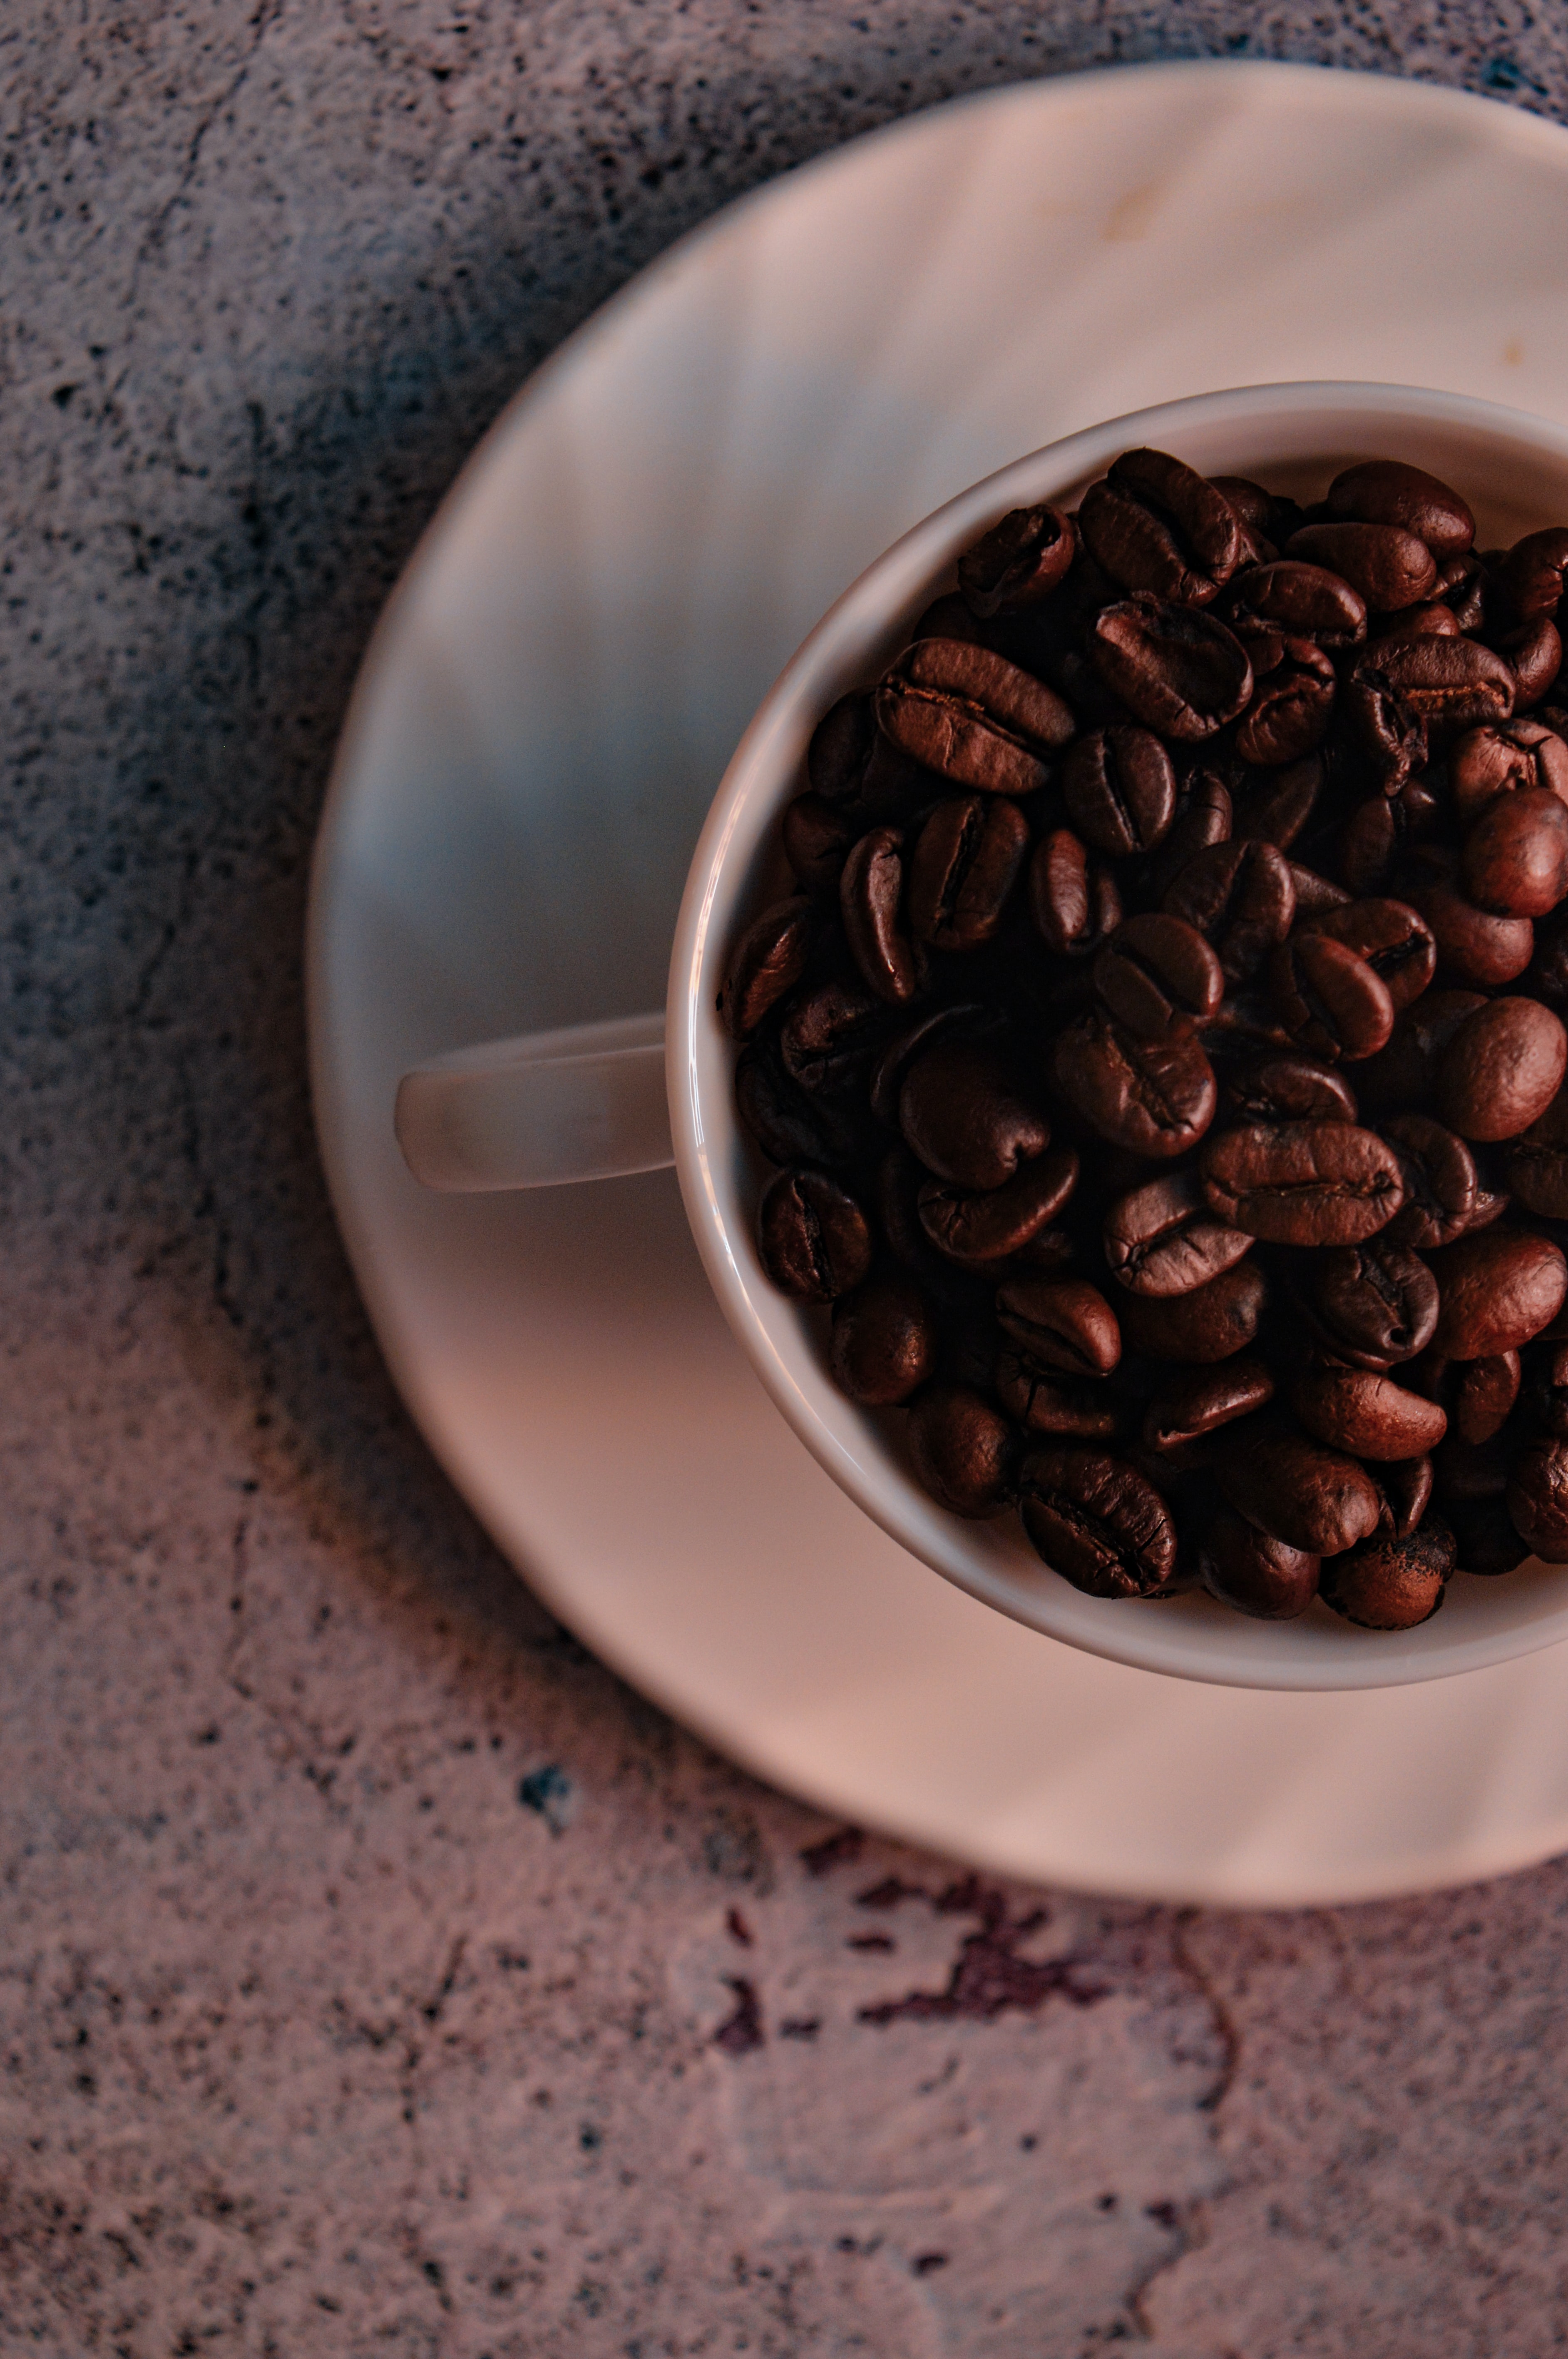 144442 download wallpaper coffee, food, cup, grains, coffee beans, grain screensavers and pictures for free